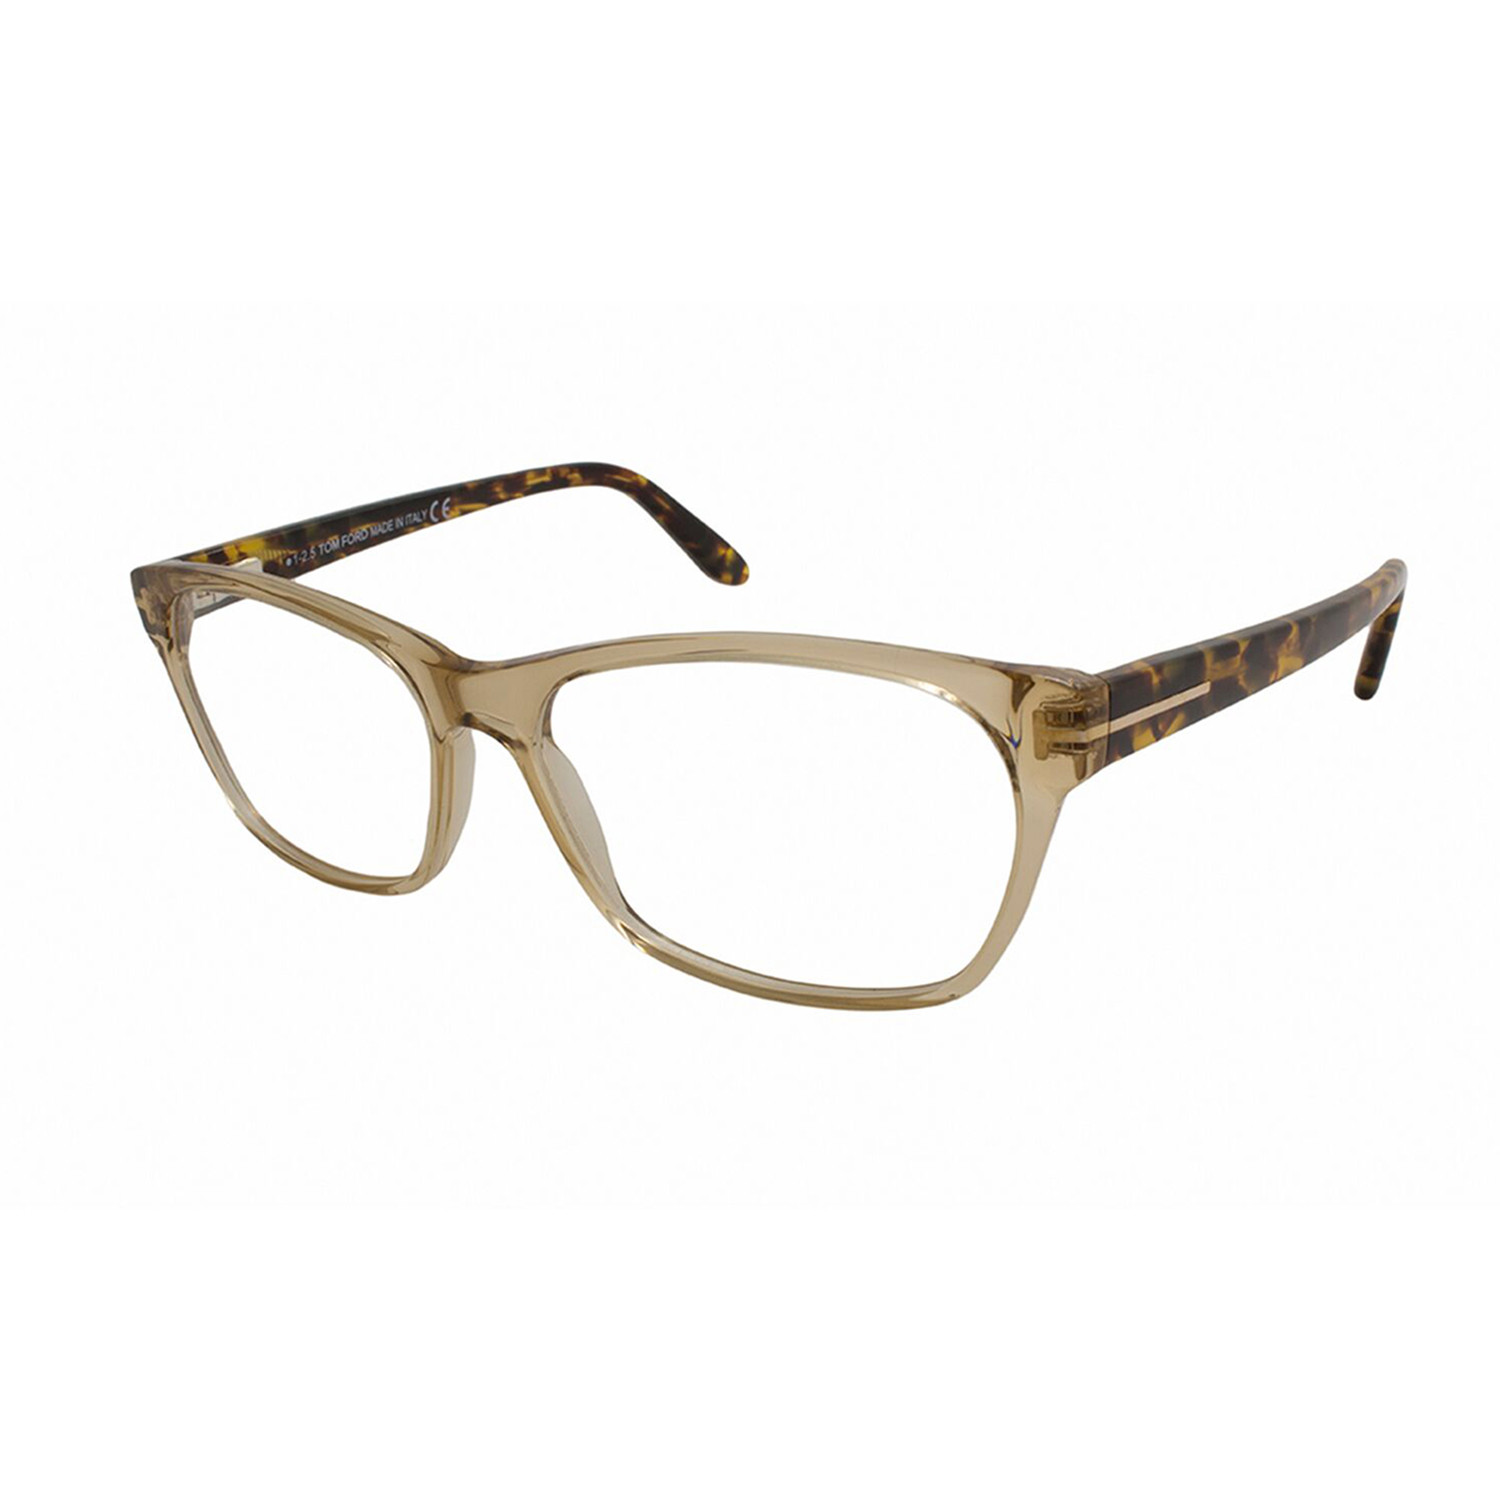 Men's Tom Ford Eyeglass Frames // Clear Brown - Tom Ford - Touch of Modern